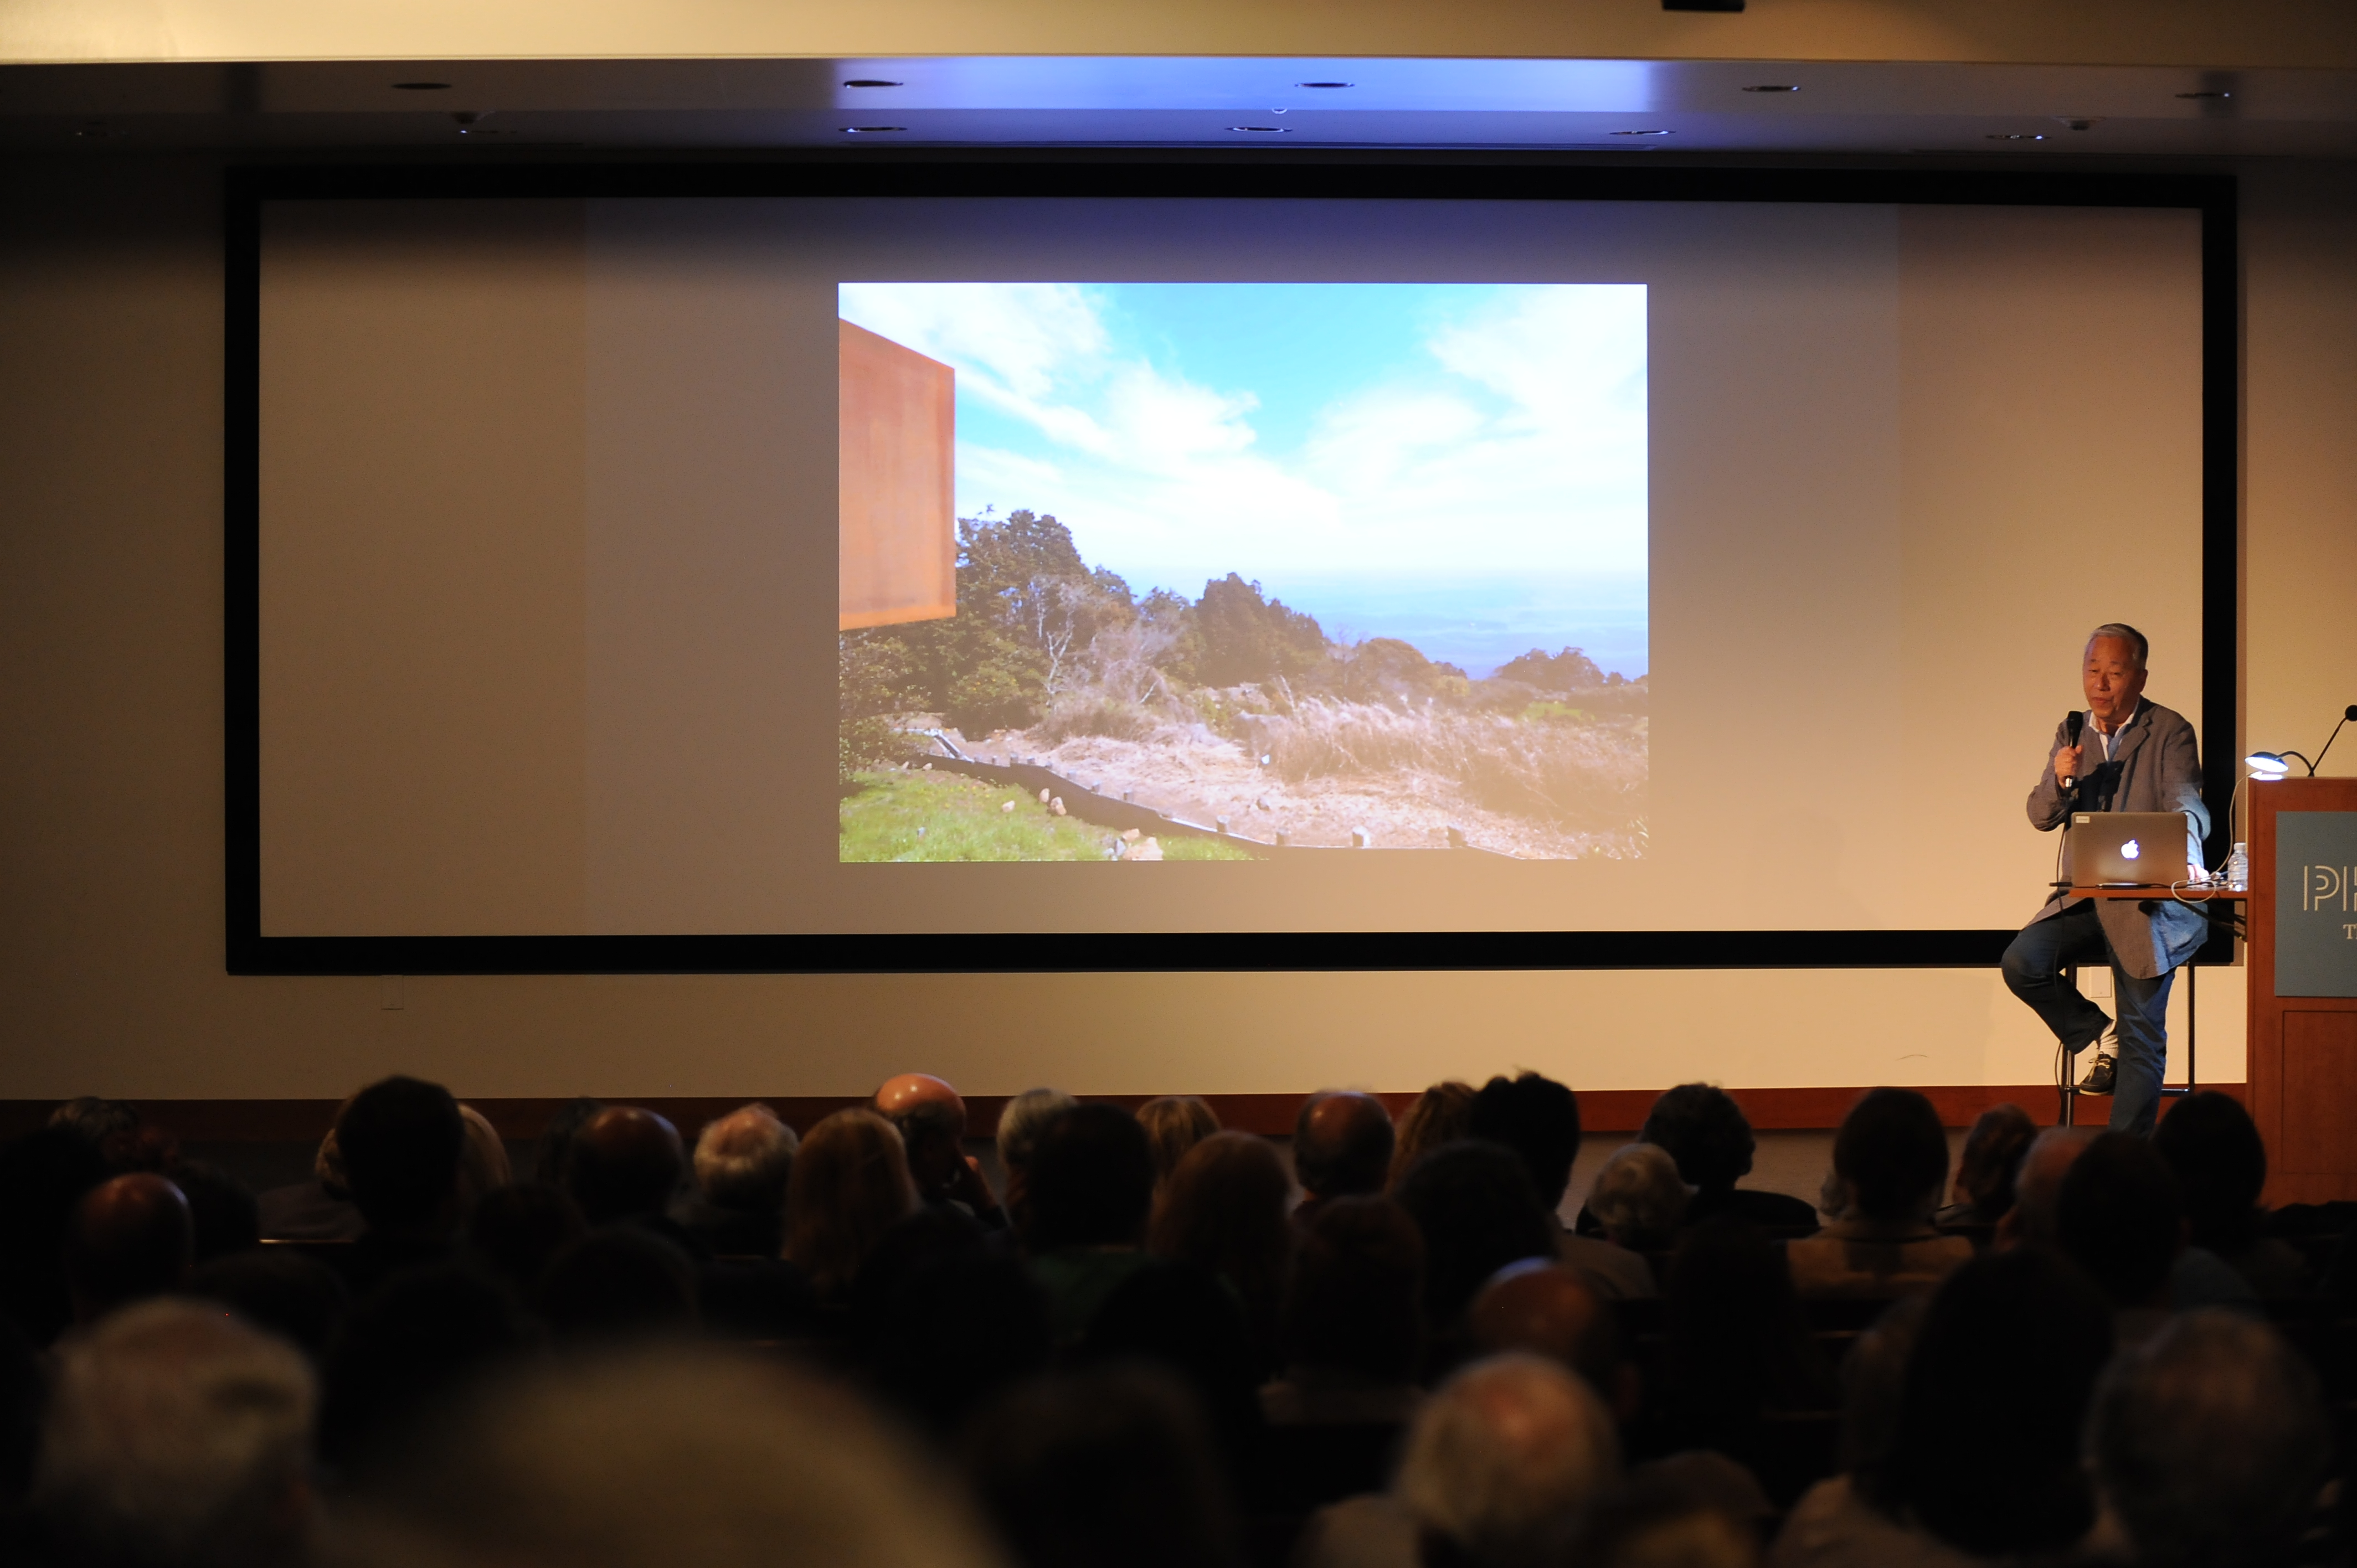 Photograph of Hiroshi Sugimoto on stage next to a podium giving a talk in an auditorium